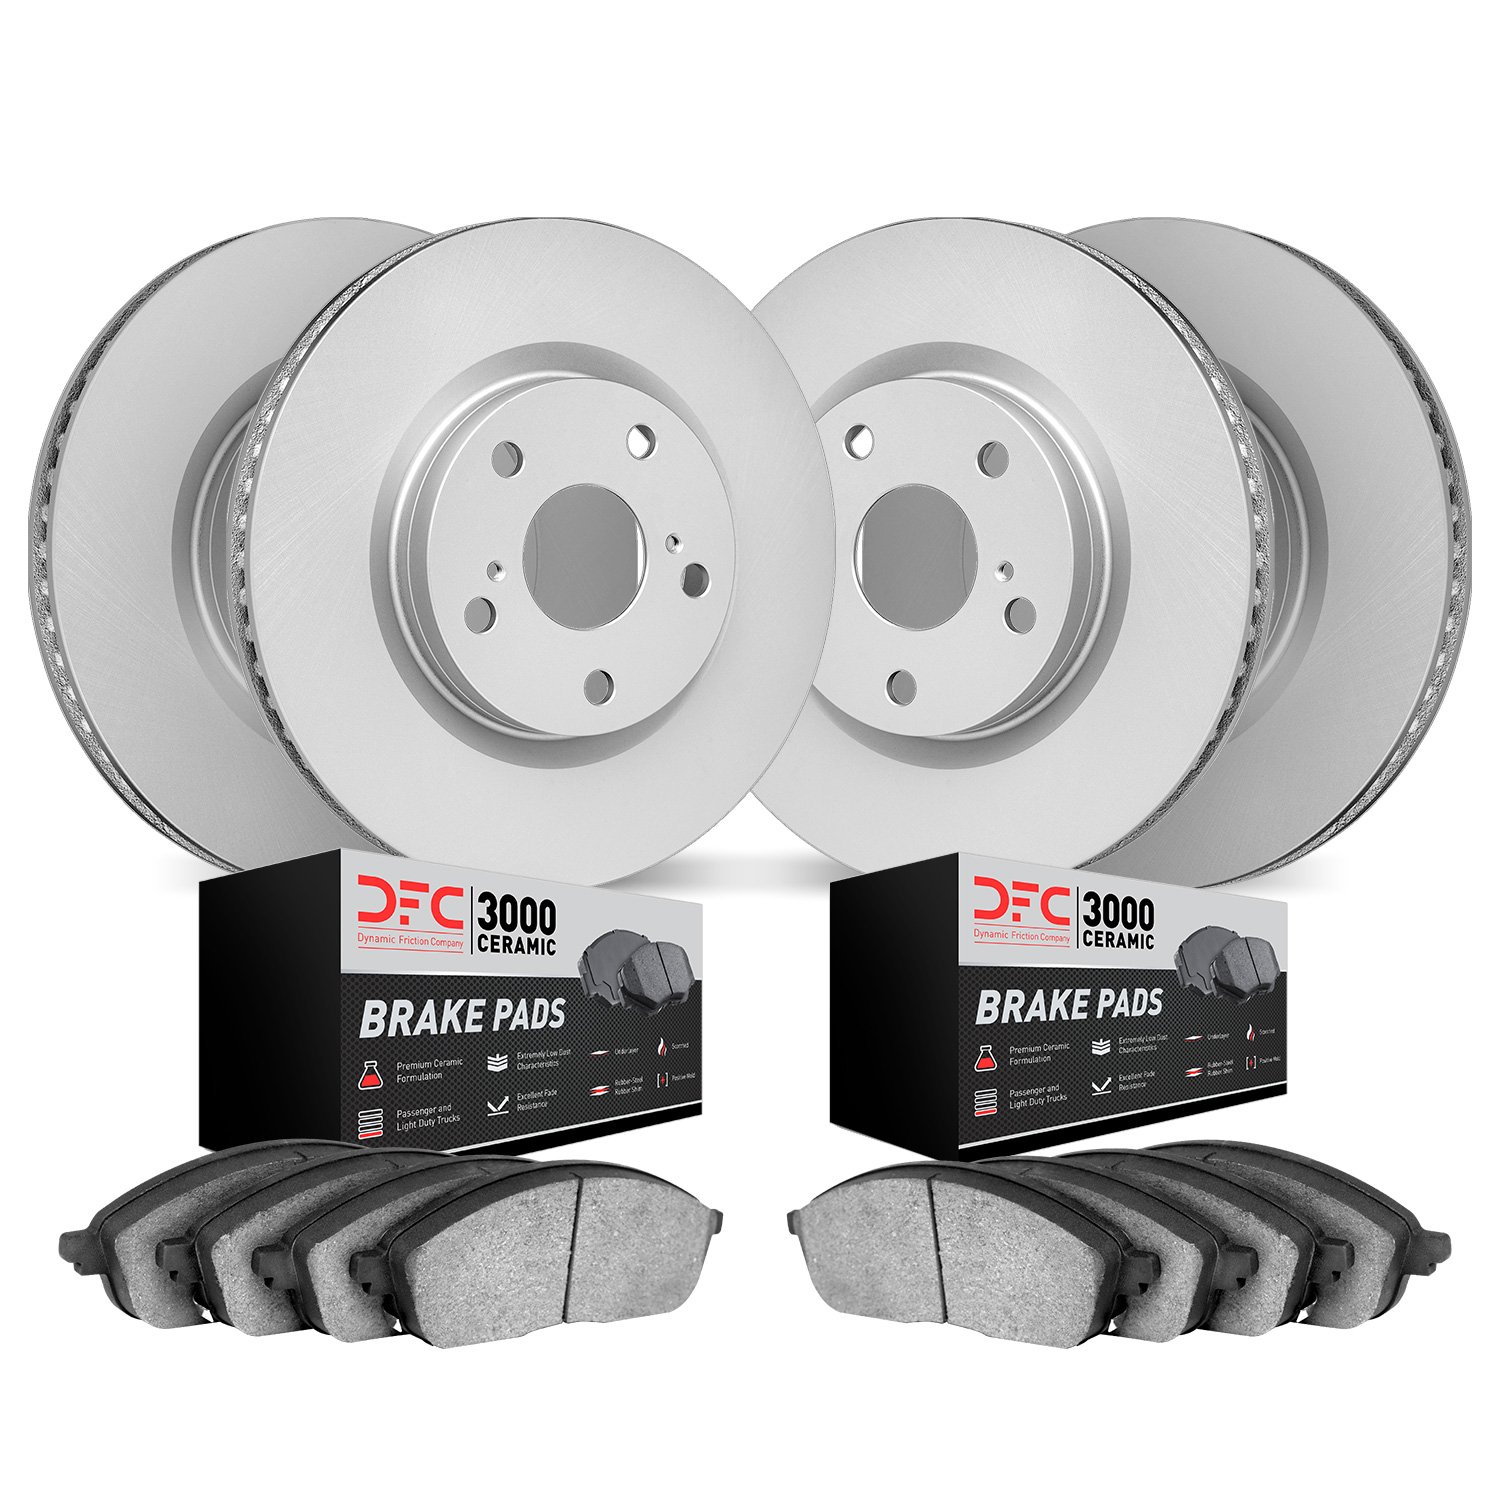 4304-31052 Geospec Brake Rotors with 3000-Series Ceramic Brake Pads Kit, 2008-2013 BMW, Position: Front and Rear